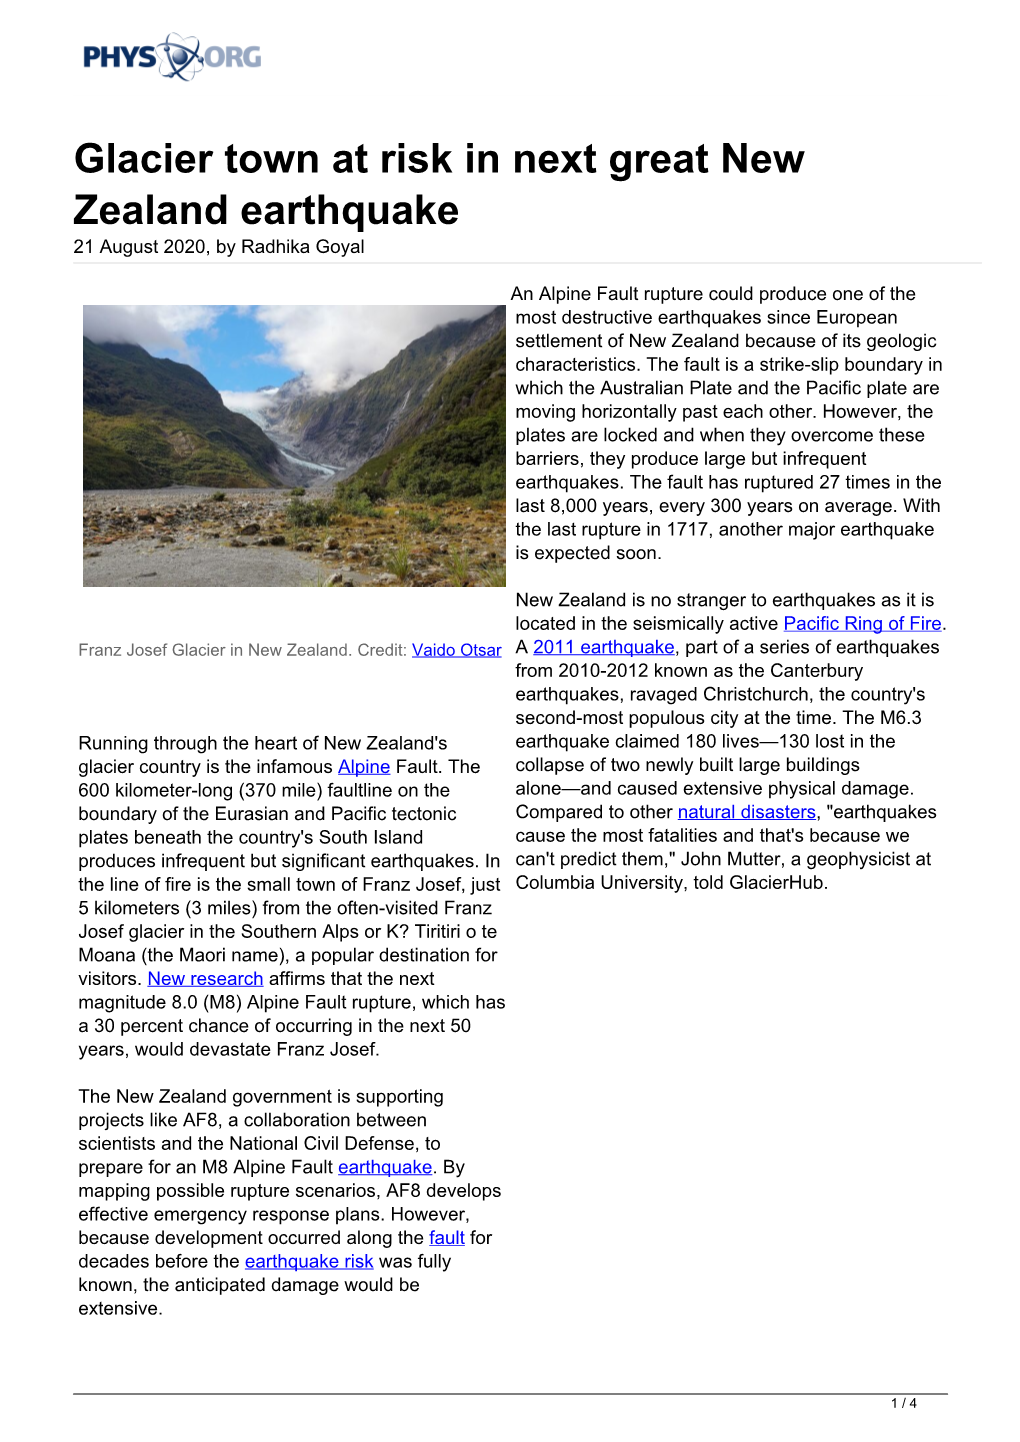 Glacier Town at Risk in Next Great New Zealand Earthquake 21 August 2020, by Radhika Goyal